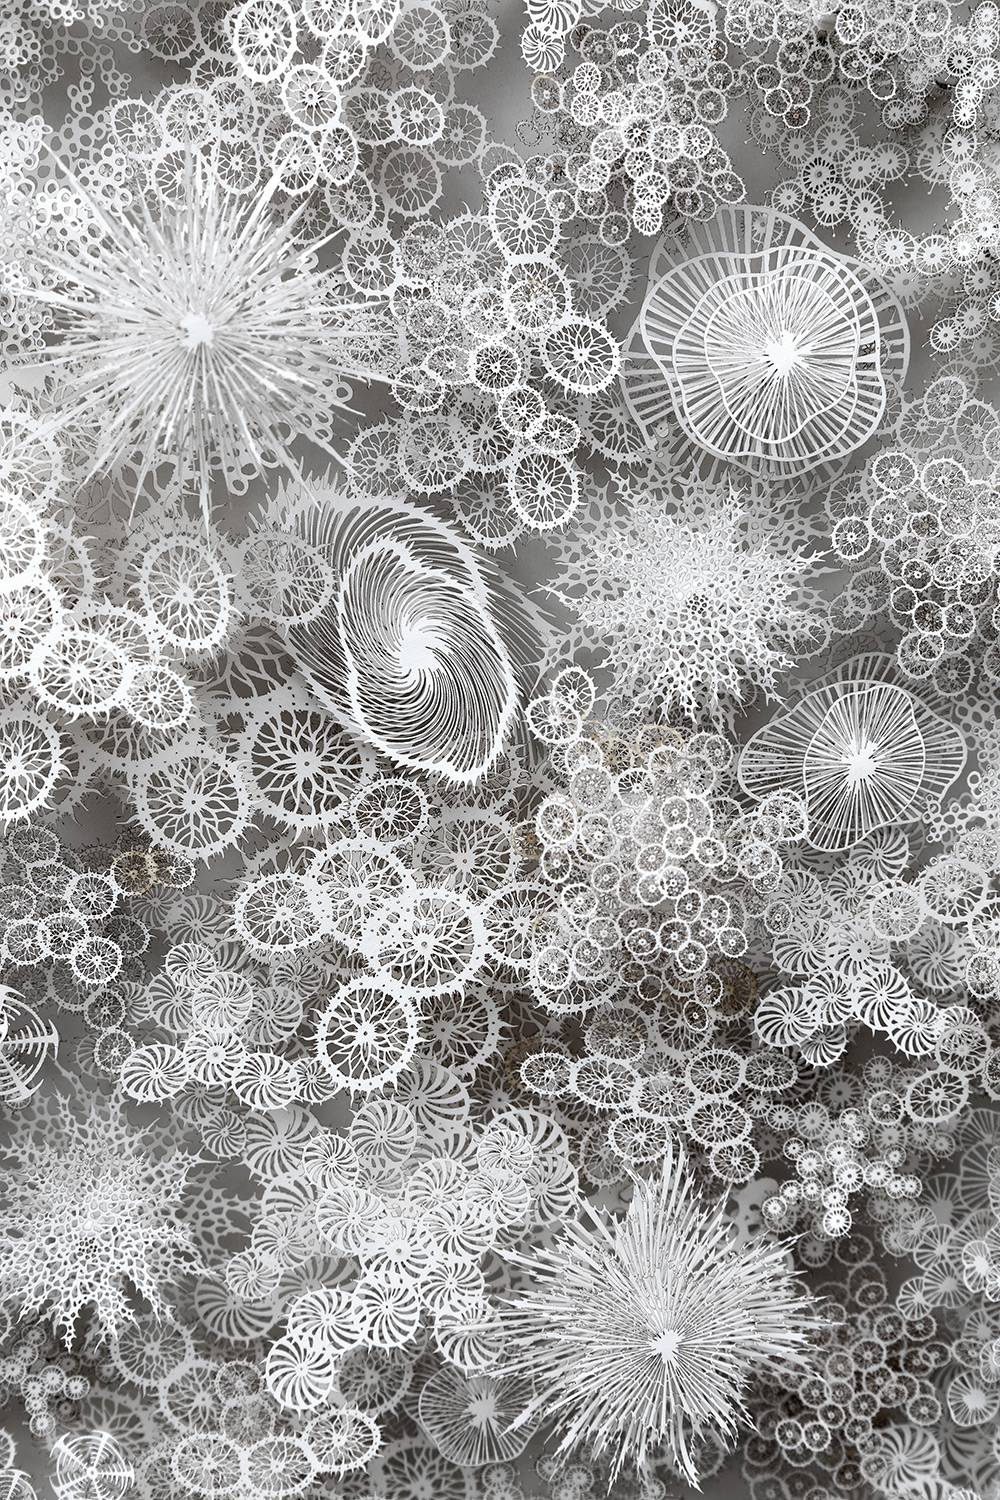 The Beautifully Intricate Paper Cut Sculptures Inspired By Corals And Microorganisms Of Rogan Brown 11